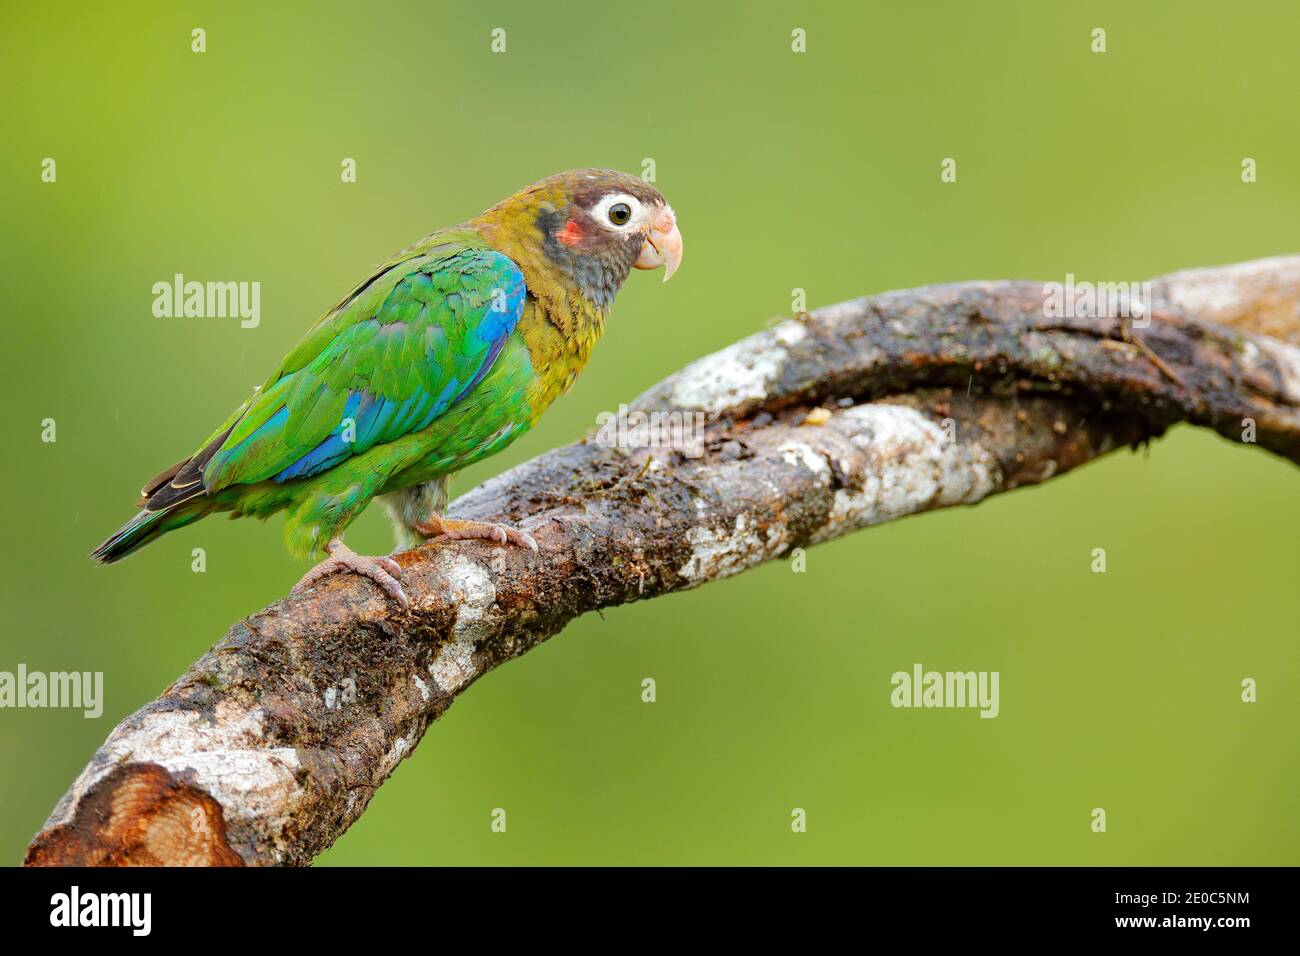 Parrot, Pionopsitta haematotis, Mexico, green parrot with brown head. Detail close-up portrait of bird from Central America. Wildlife scene from tropi Stock Photo